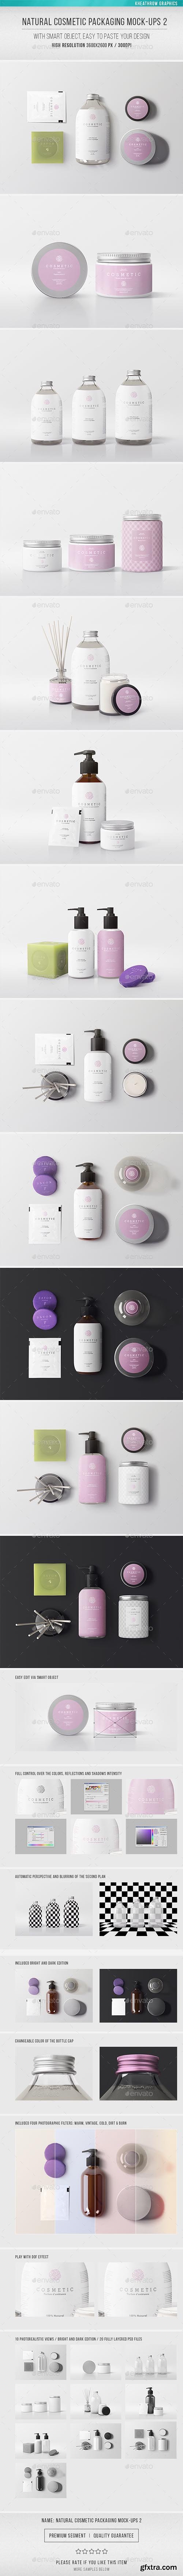 Graphicriver Natural Cosmetic Packaging Mock-Ups 2 17337833